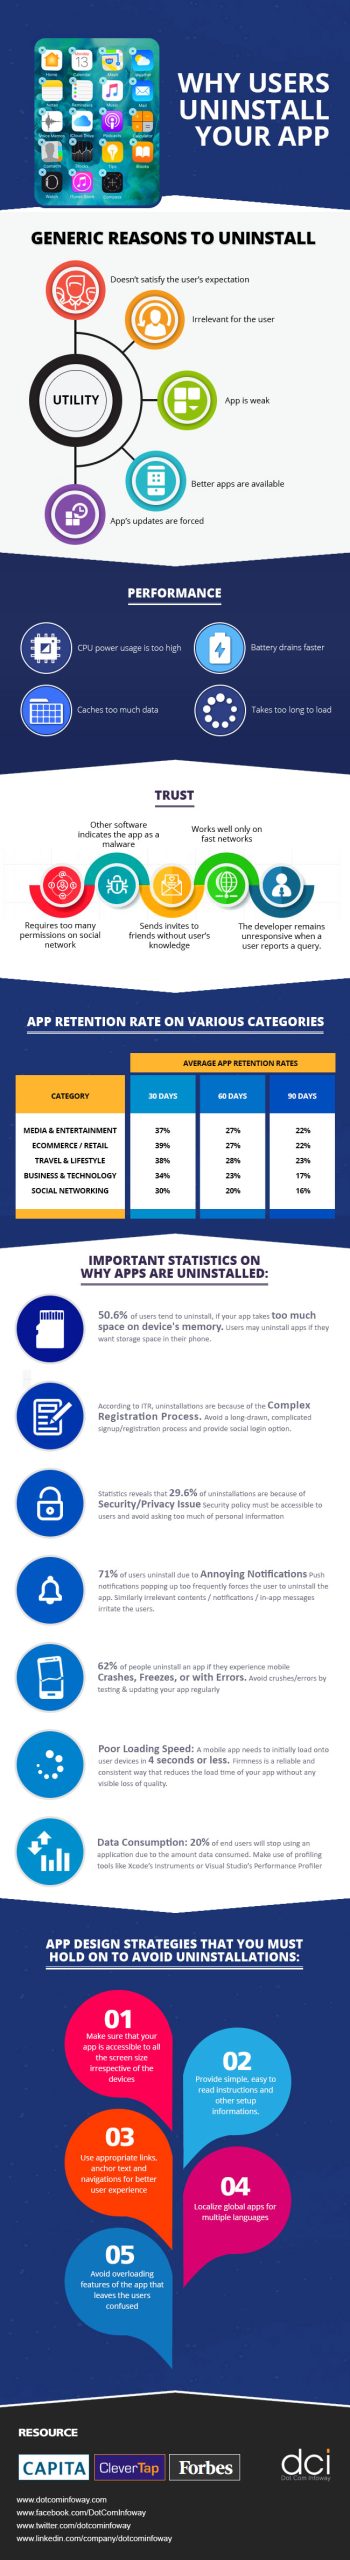 infographic why users uninstall your app